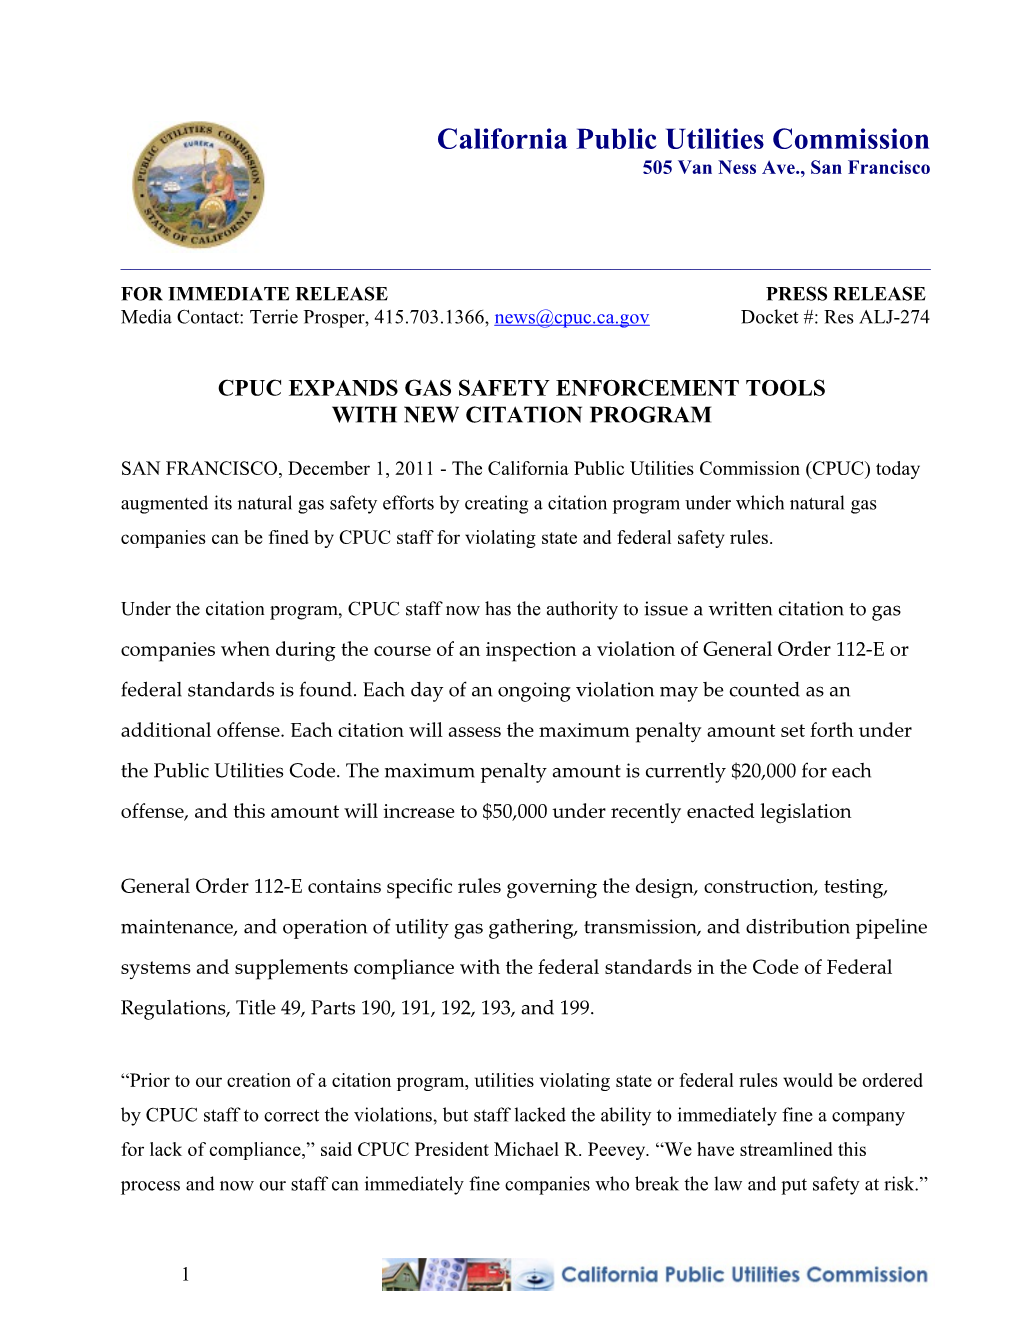 Cpuc Expands Gas Safety Enforcement Tools with New Citation Program